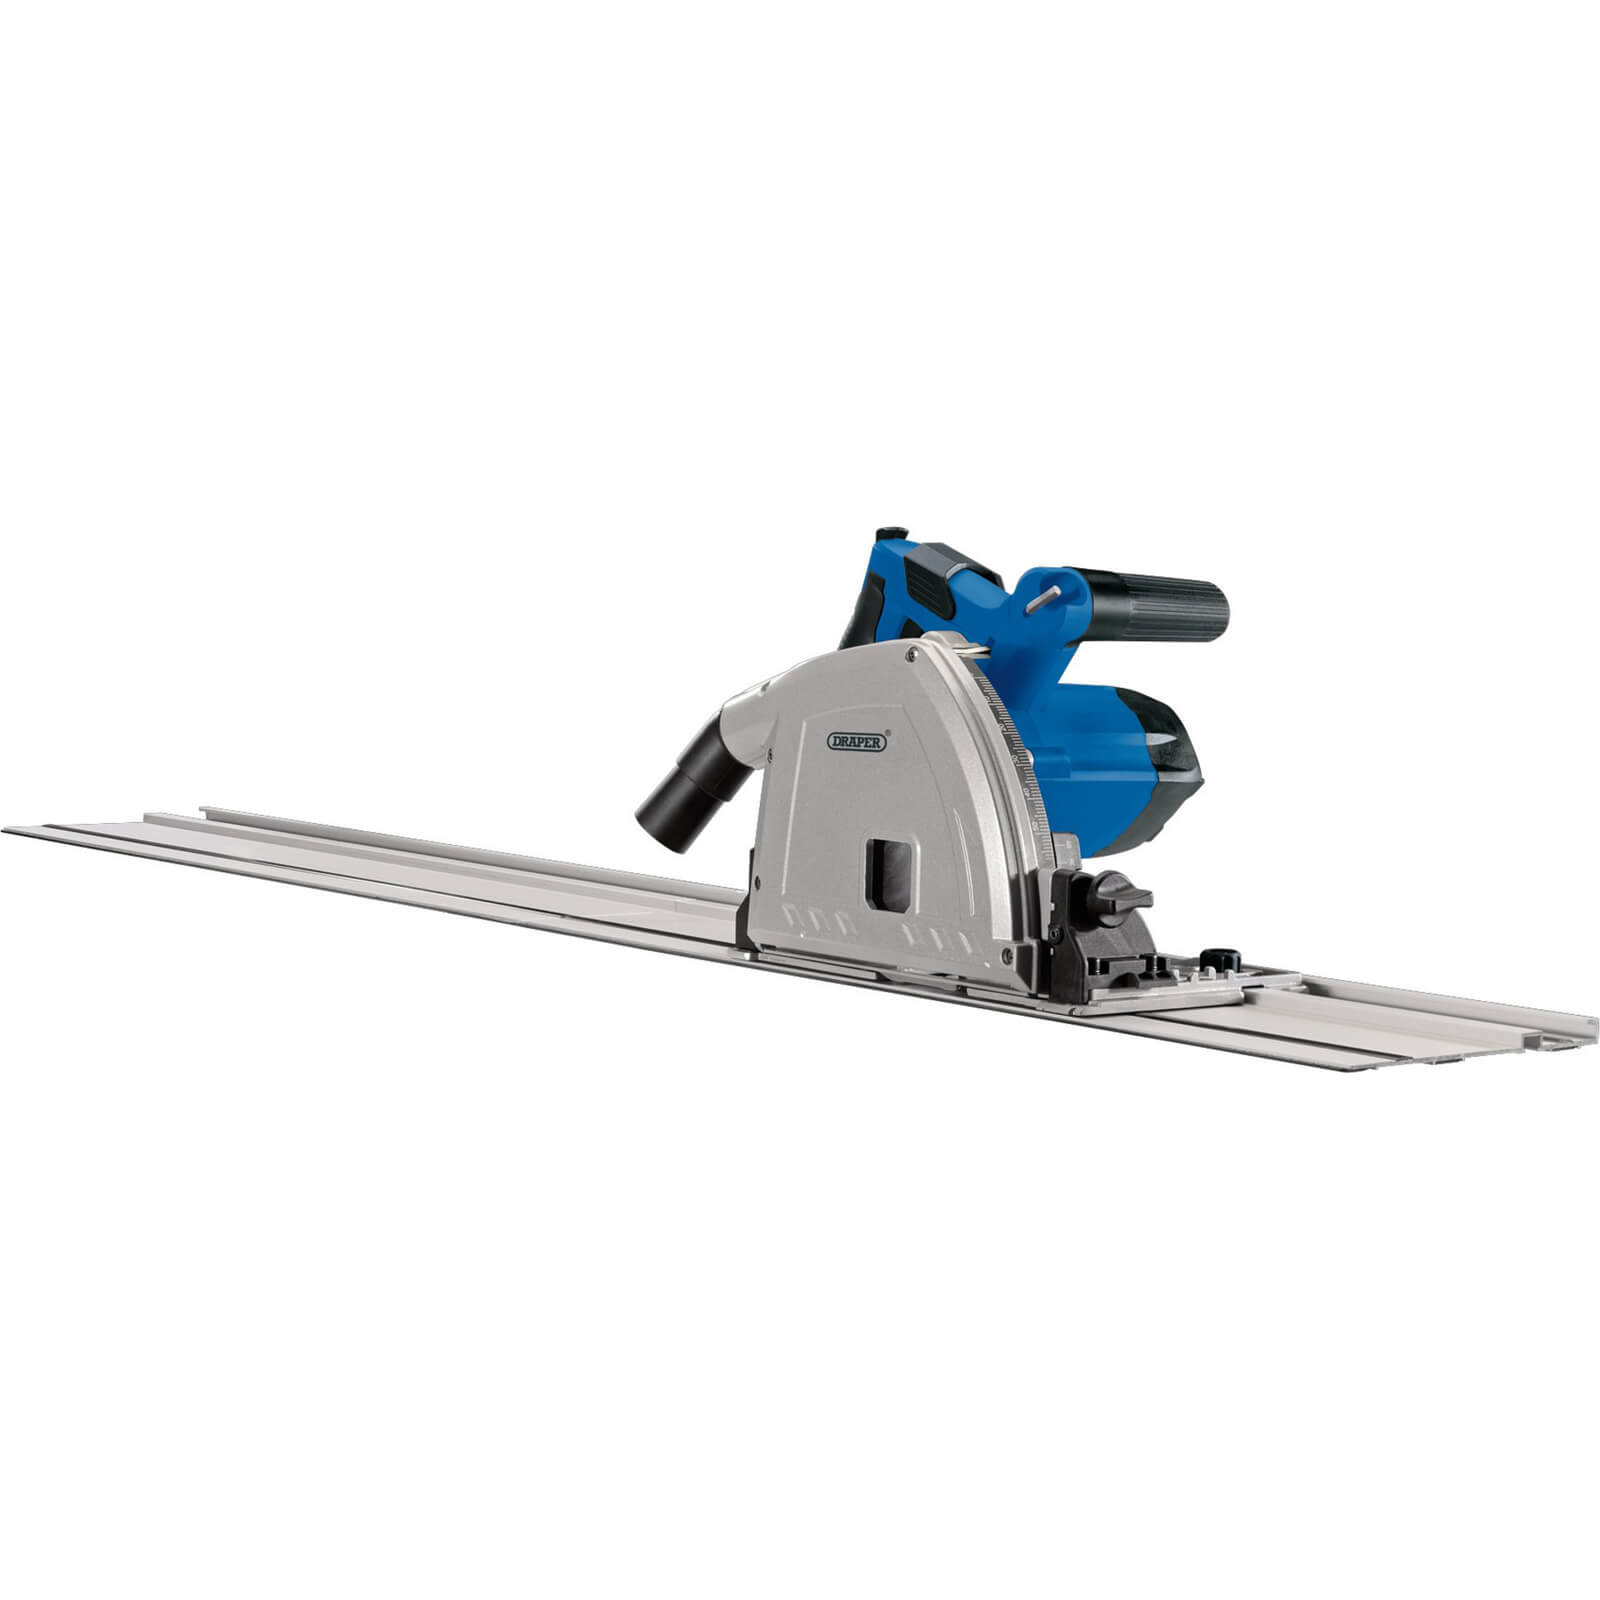 Image of Draper PS1200D Plunge Saw and Guide Rails 240v